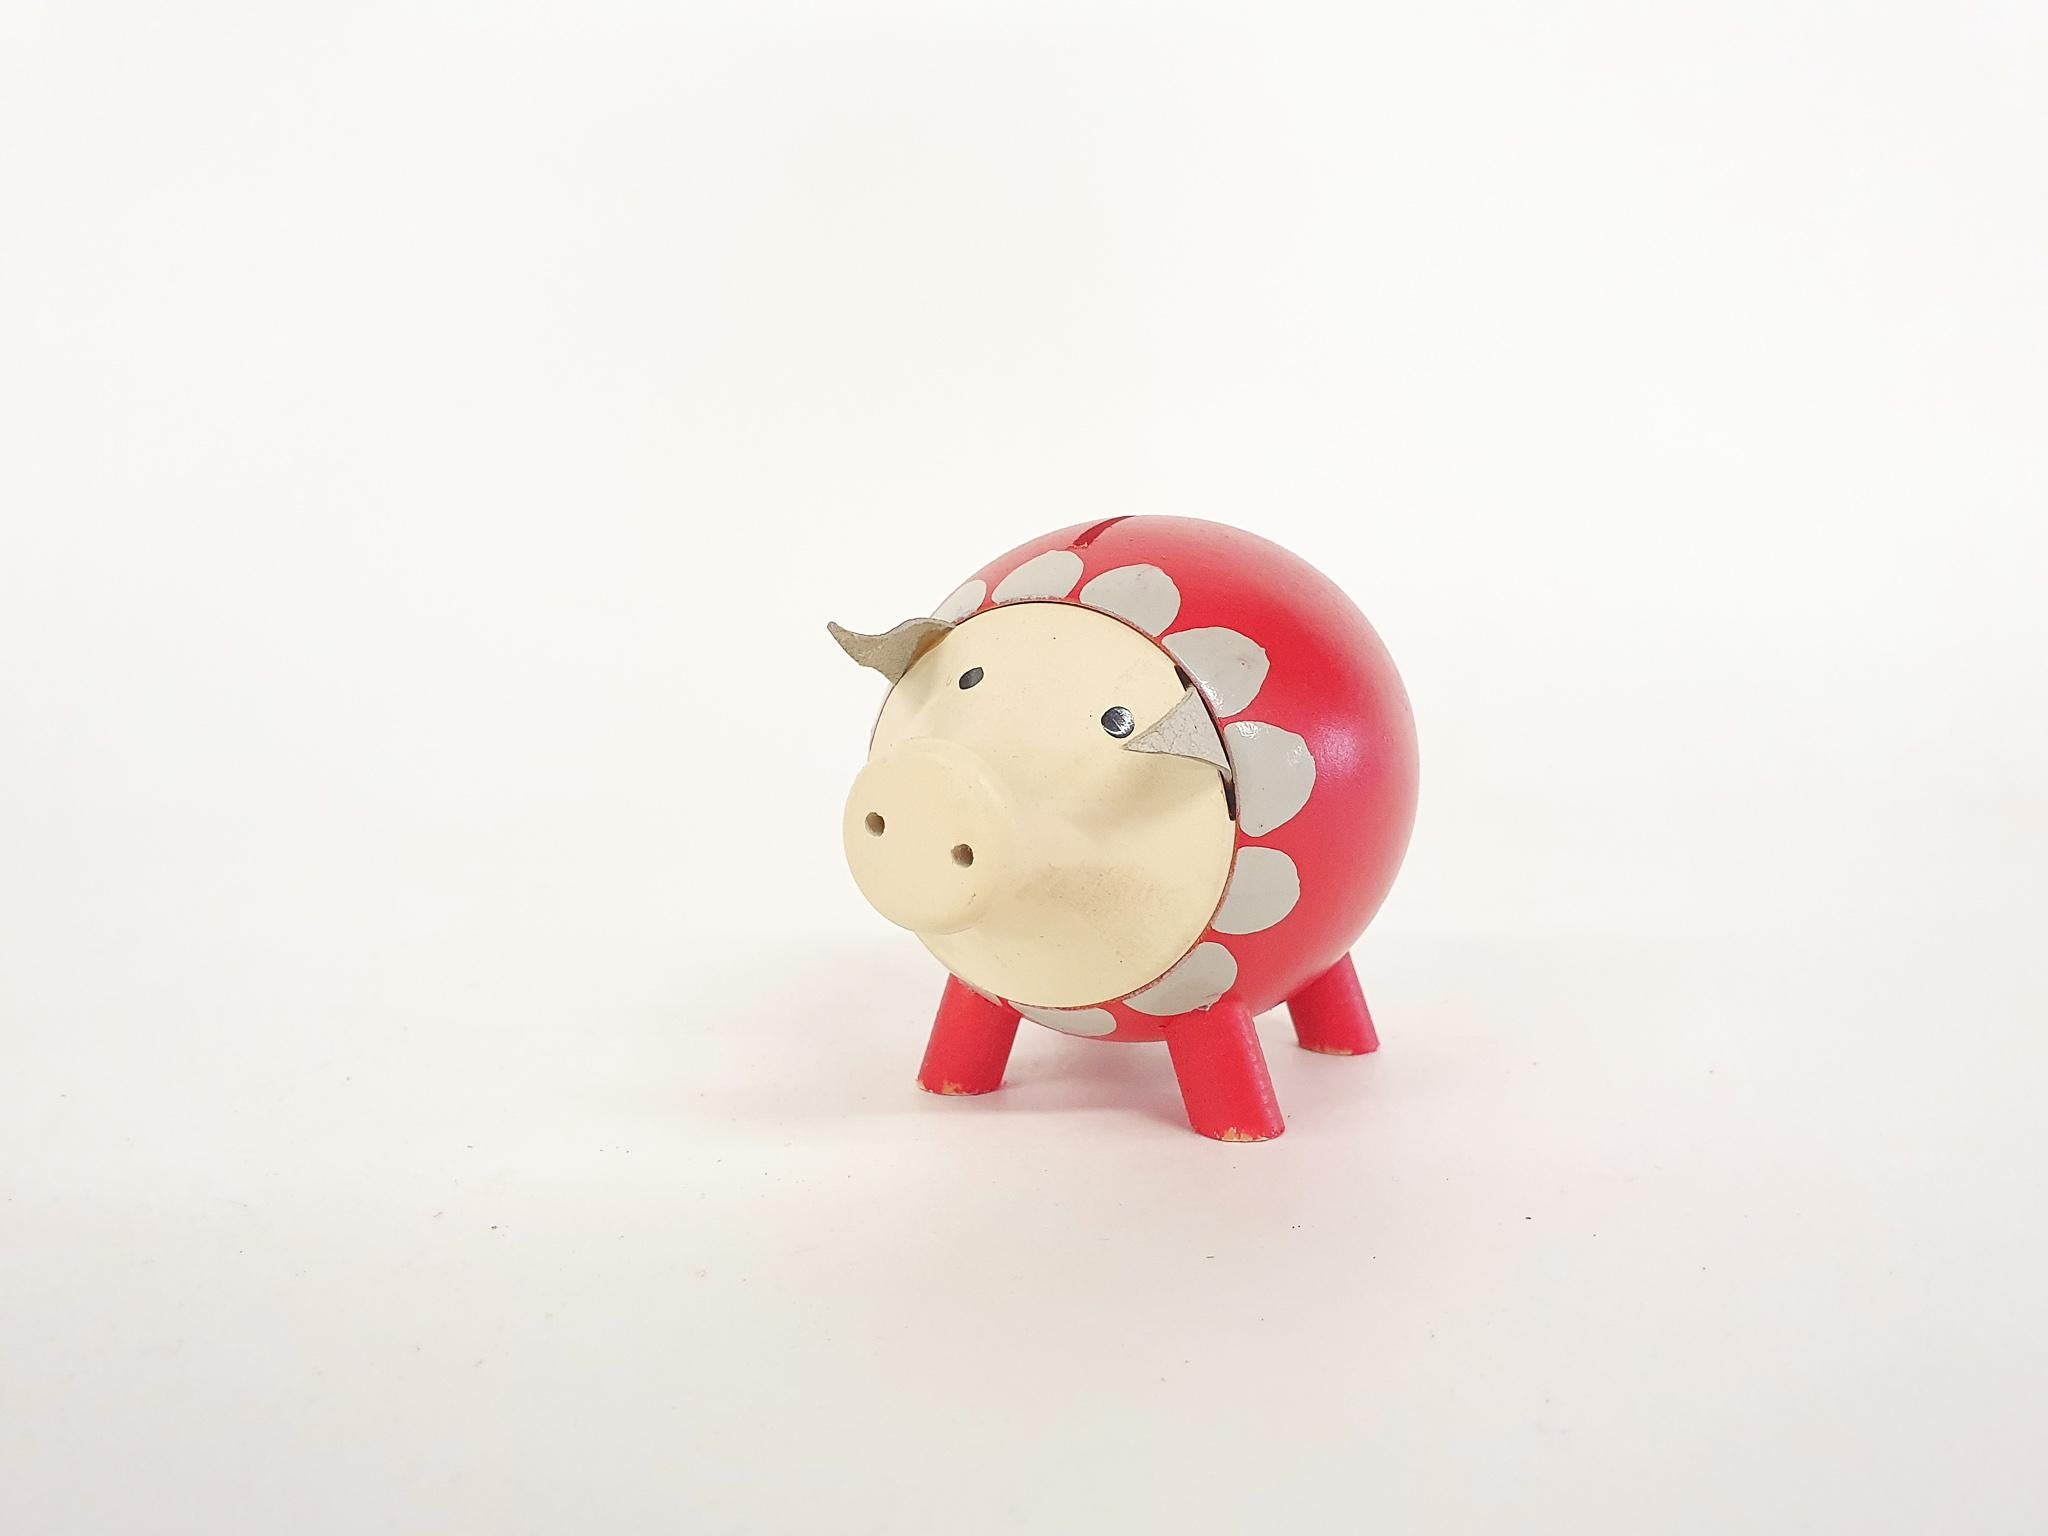 Handpainted wooden piggy bank. The head can come off to take out your savings.